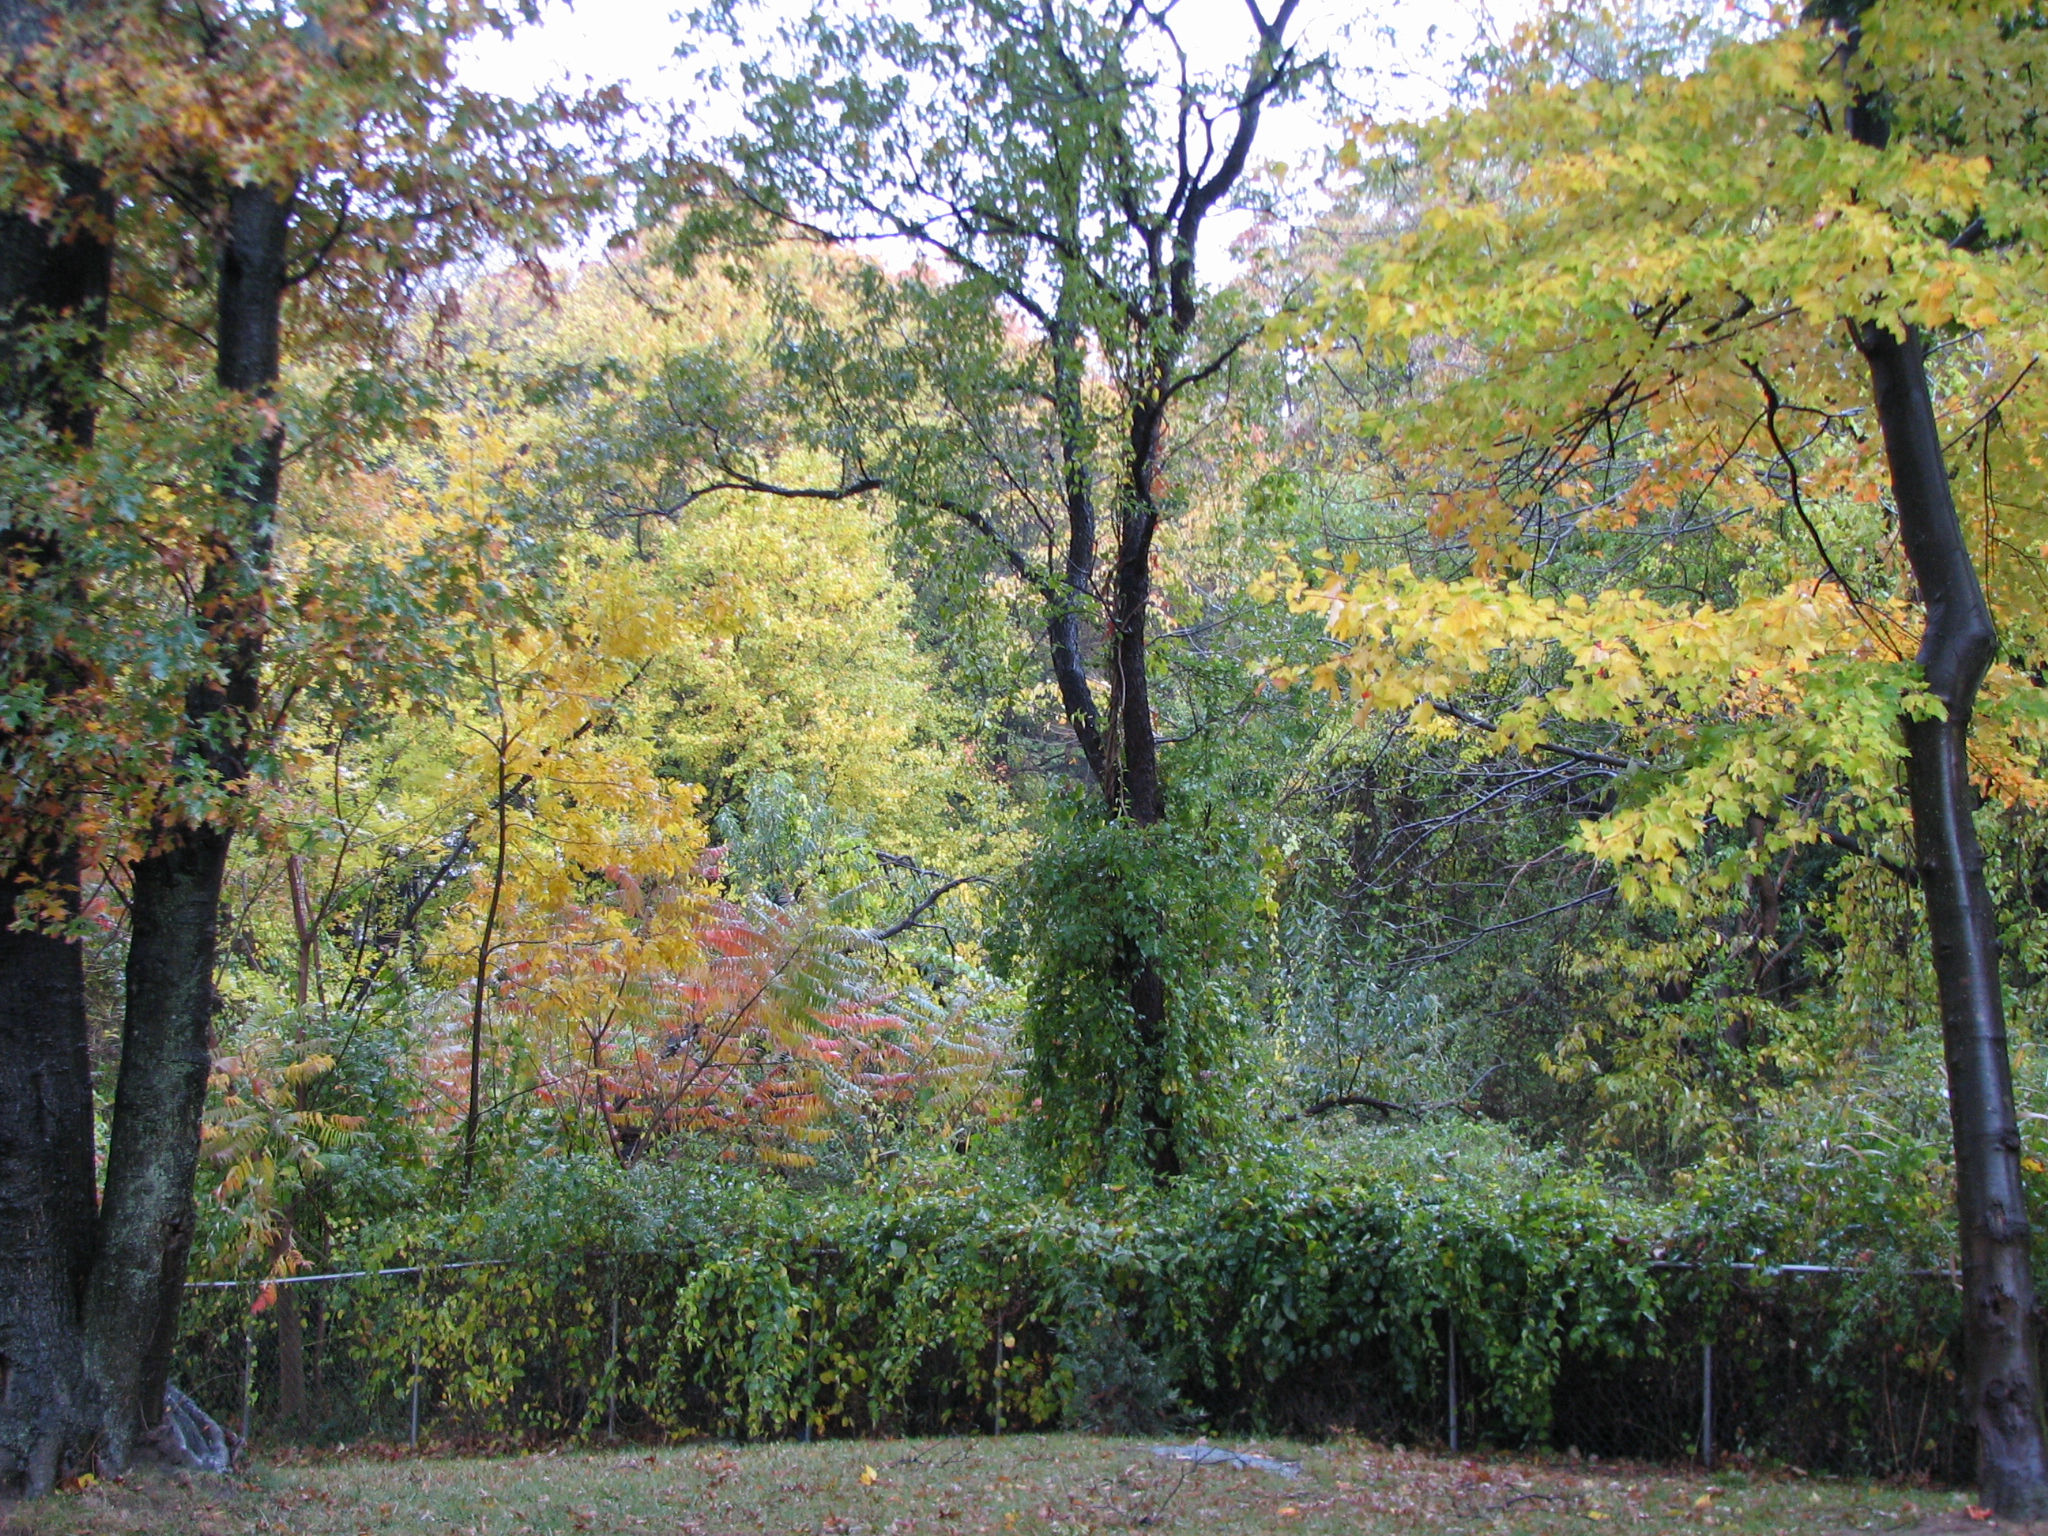 some tall trees with some colorful foliage near them